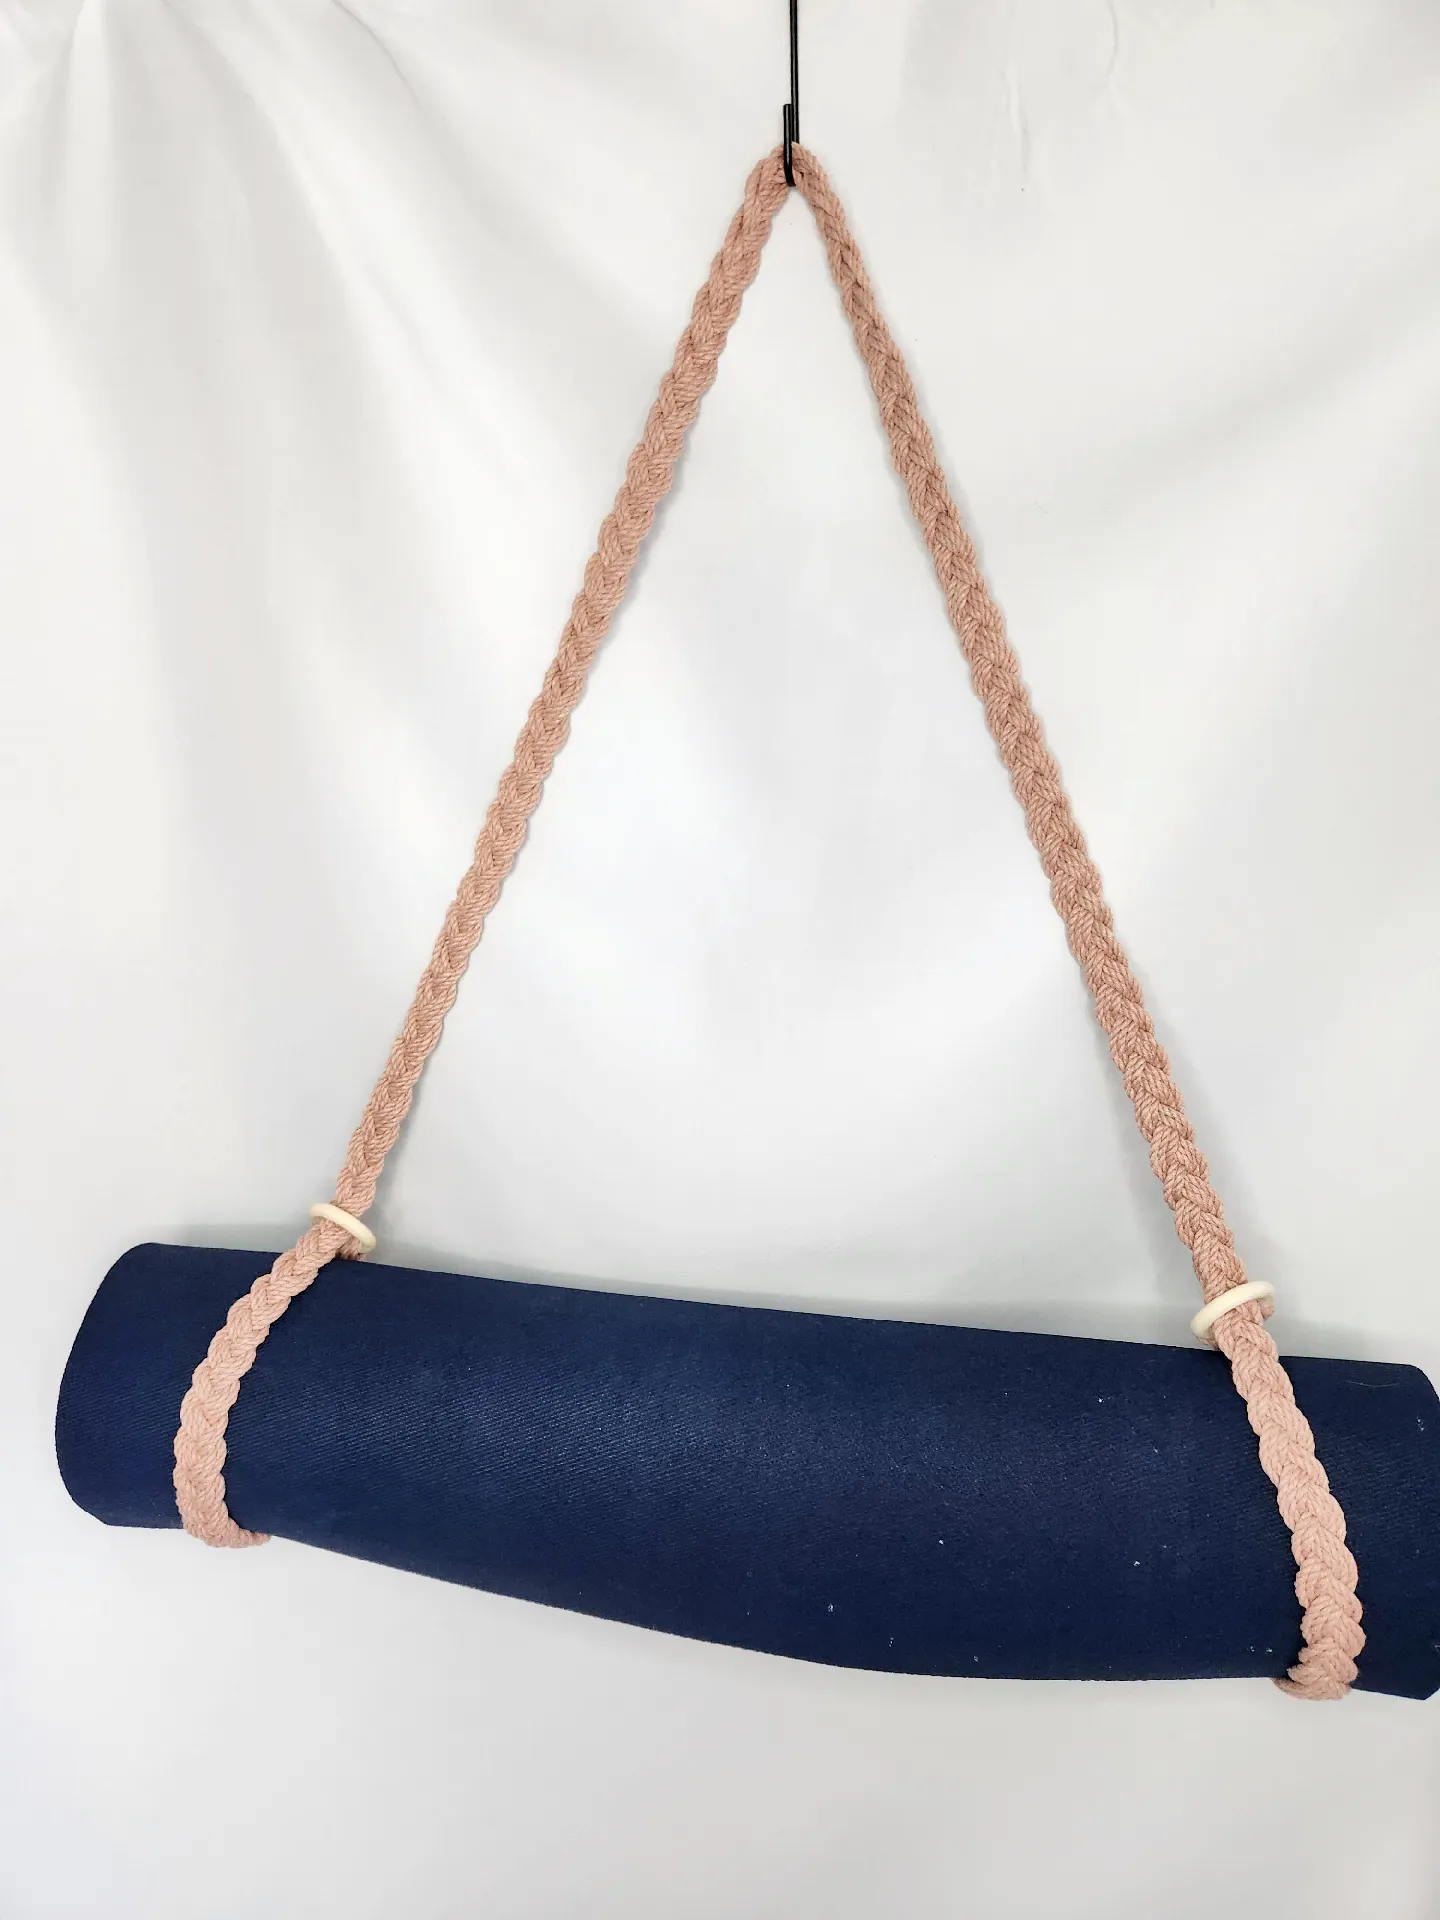 Handmade Macrame Yoga Carrier, Gallery posted by Brittany